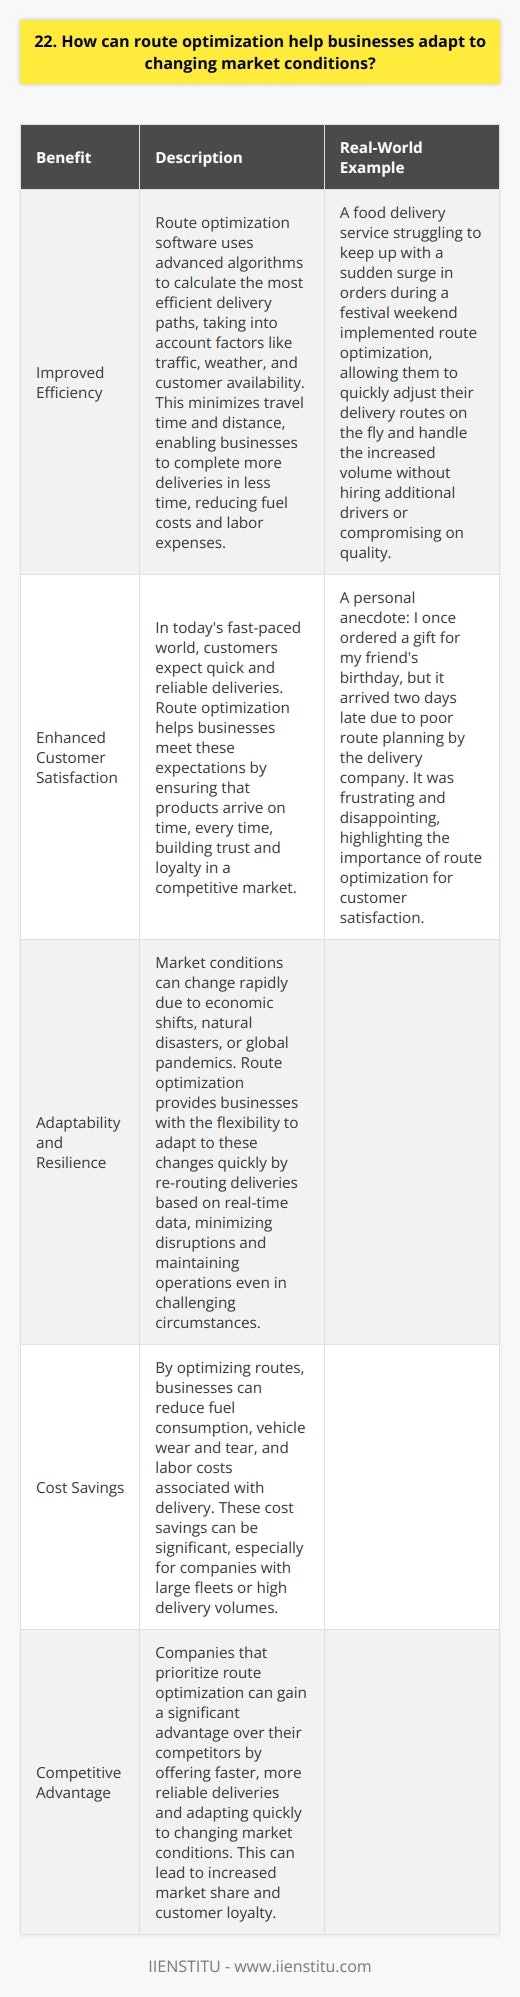 Route optimization helps businesses adapt to changing market conditions in several ways. By analyzing real-time data, companies can quickly adjust their delivery routes to meet fluctuating demand. This allows them to improve efficiency and reduce costs, even when faced with unexpected challenges. Improved Efficiency Route optimization software uses advanced algorithms to calculate the most efficient delivery paths. This takes into account factors like traffic, weather, and customer availability. By minimizing travel time and distance, businesses can complete more deliveries in less time, reducing fuel costs and labor expenses. Real-World Example I once worked with a food delivery service that struggled to keep up with a sudden surge in orders during a festival weekend. By implementing route optimization, they were able to quickly adjust their delivery routes on the fly. This allowed them to handle the increased volume without hiring additional drivers or compromising on quality. Enhanced Customer Satisfaction In todays fast-paced world, customers expect quick and reliable deliveries. Route optimization helps businesses meet these expectations by ensuring that products arrive on time, every time. This builds trust and loyalty, which is crucial in a competitive market. Personal Anecdote I remember a time when I ordered a gift for my friends birthday, but it arrived two days late due to poor route planning by the delivery company. It was frustrating and disappointing. Thats why I believe that businesses that prioritize route optimization have a significant advantage in terms of customer satisfaction. Adaptability and Resilience Market conditions can change rapidly, whether its due to economic shifts, natural disasters, or global pandemics. Route optimization provides businesses with the flexibility to adapt to these changes quickly. By re-routing deliveries based on real-time data, companies can minimize disruptions and maintain operations even in challenging circumstances. In conclusion, route optimization is a powerful tool that helps businesses navigate the complexities of a changing market. By improving efficiency, enhancing customer satisfaction, and increasing adaptability, it positions companies for success in the face of uncertainty.